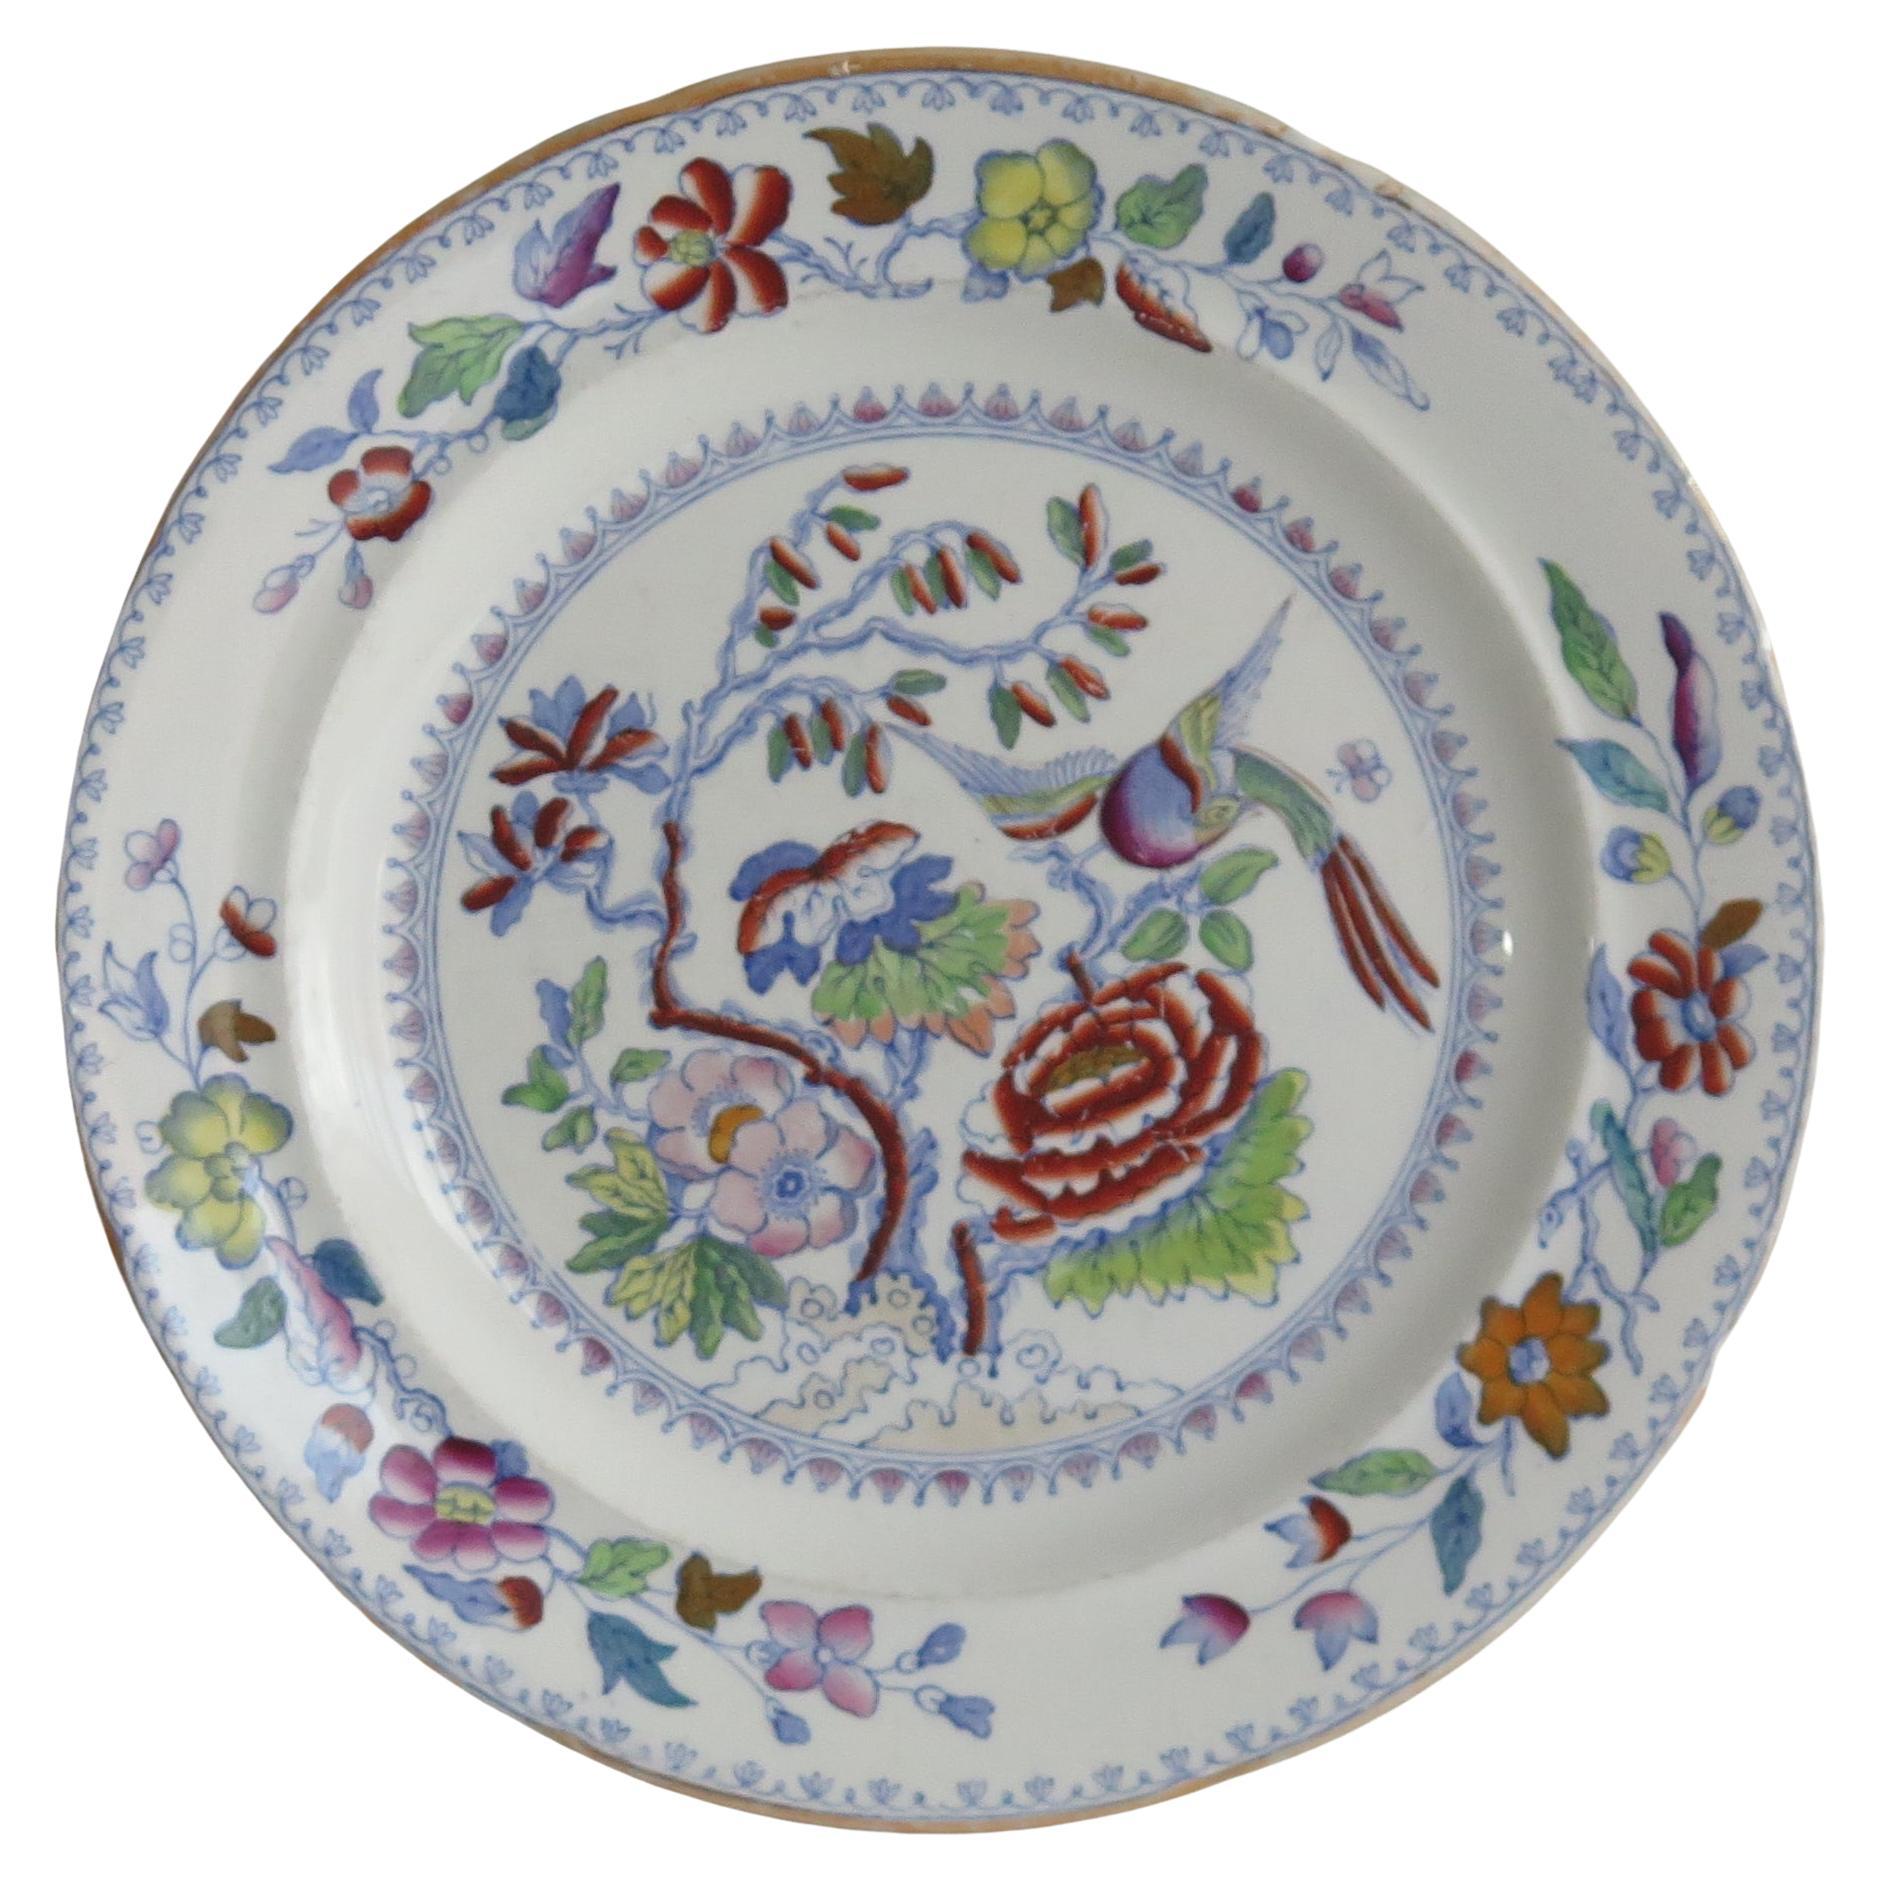 Mason's Ironstone Large Dinner Plate in the Flying Bird Pattern, circa 1860